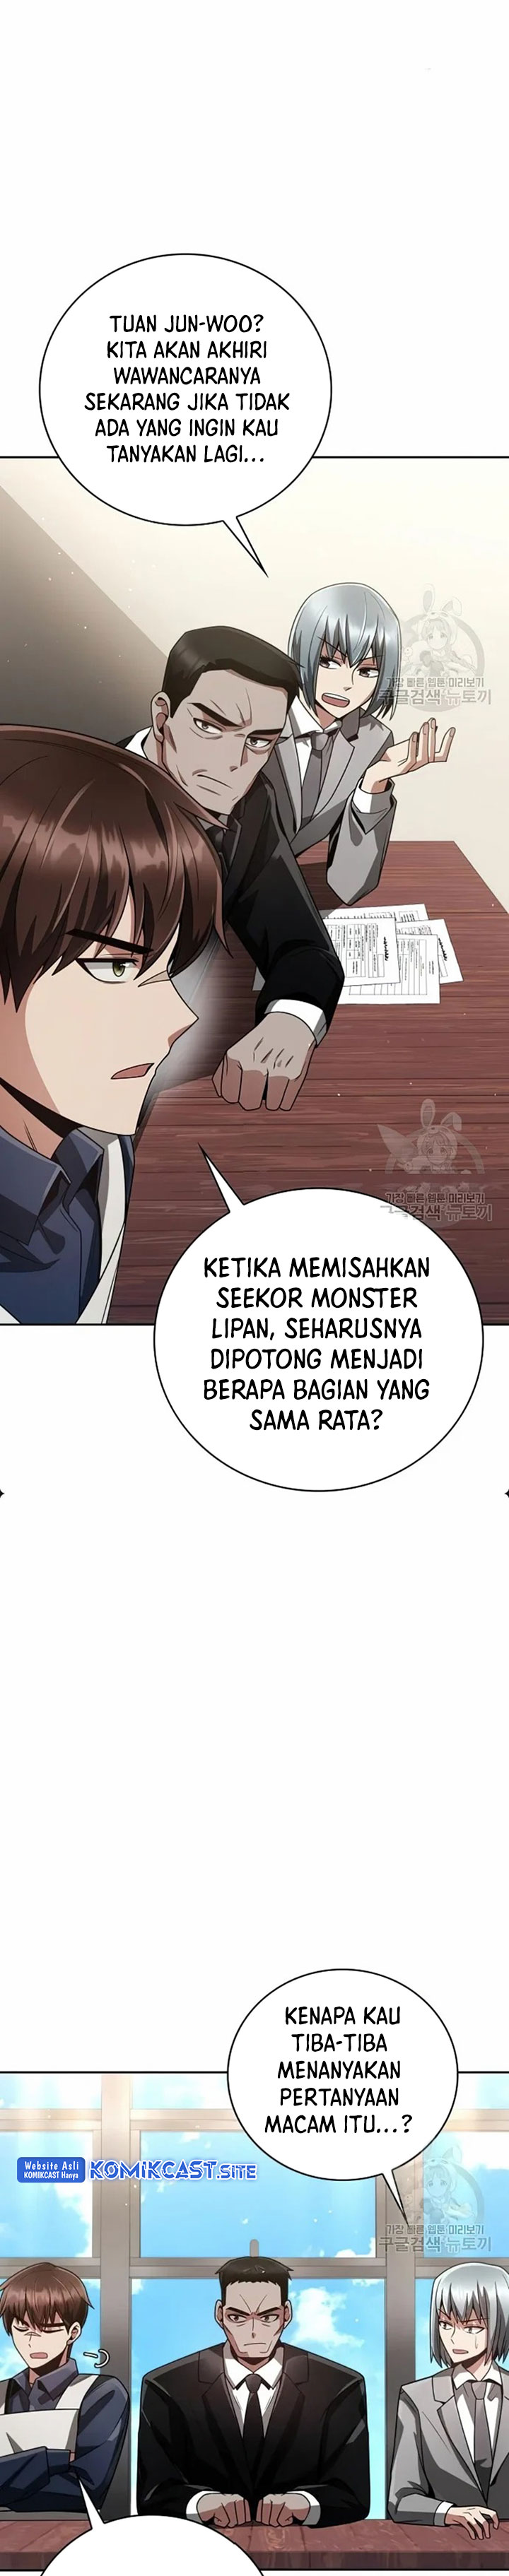 Dilarang COPAS - situs resmi www.mangacanblog.com - Komik clever cleaning life of the returned genius hunter 029 - chapter 29 30 Indonesia clever cleaning life of the returned genius hunter 029 - chapter 29 Terbaru 11|Baca Manga Komik Indonesia|Mangacan